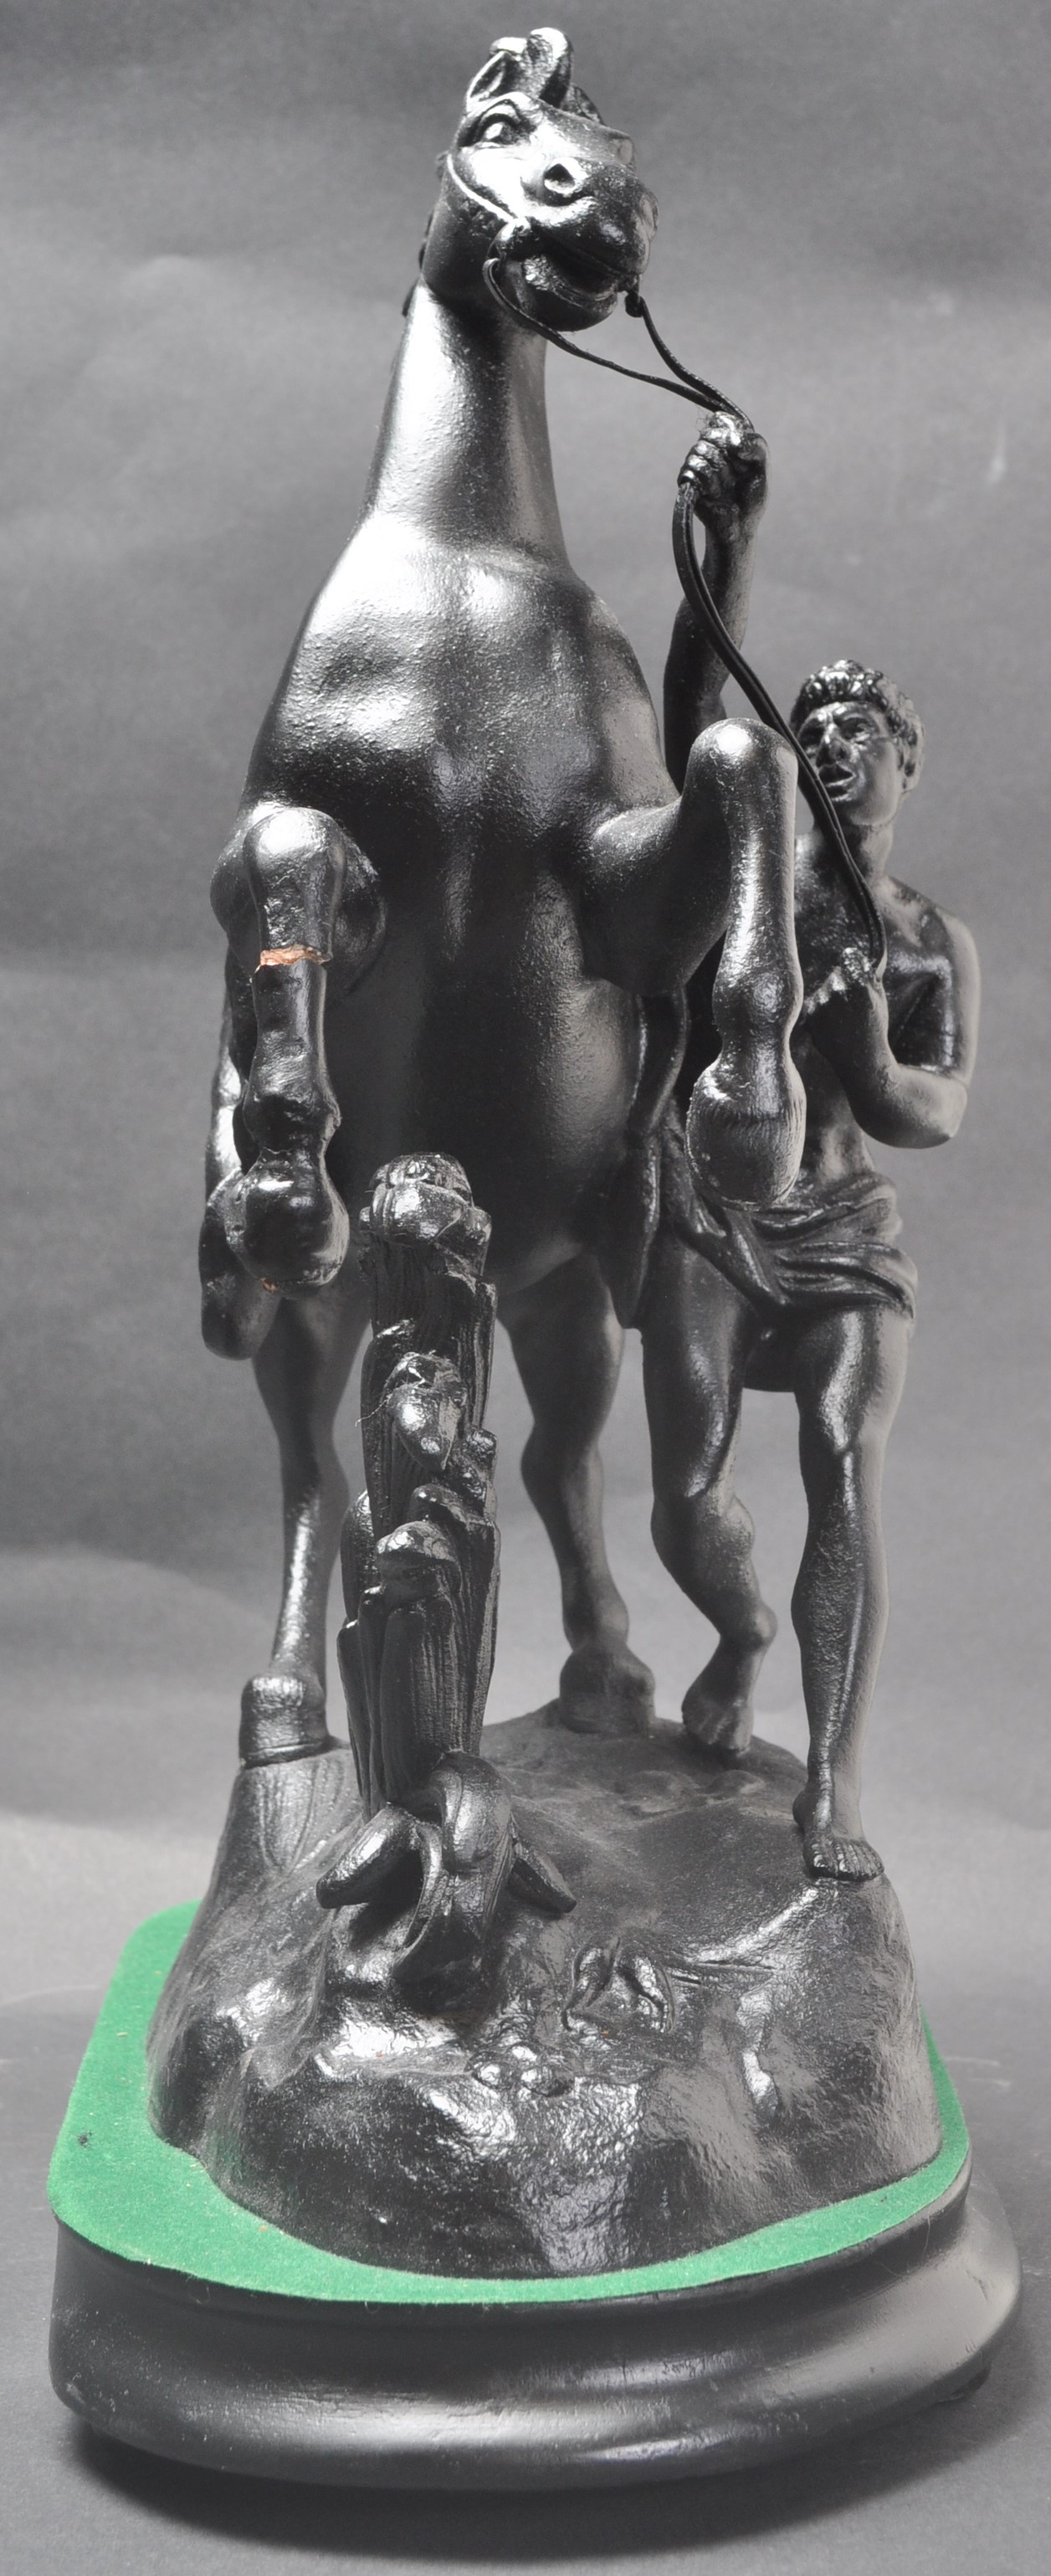 20TH CENTURY VINTAGE SPELTER FIGURINE OF A YOUTH CONTROLLING A REARING HORSE - Image 6 of 8